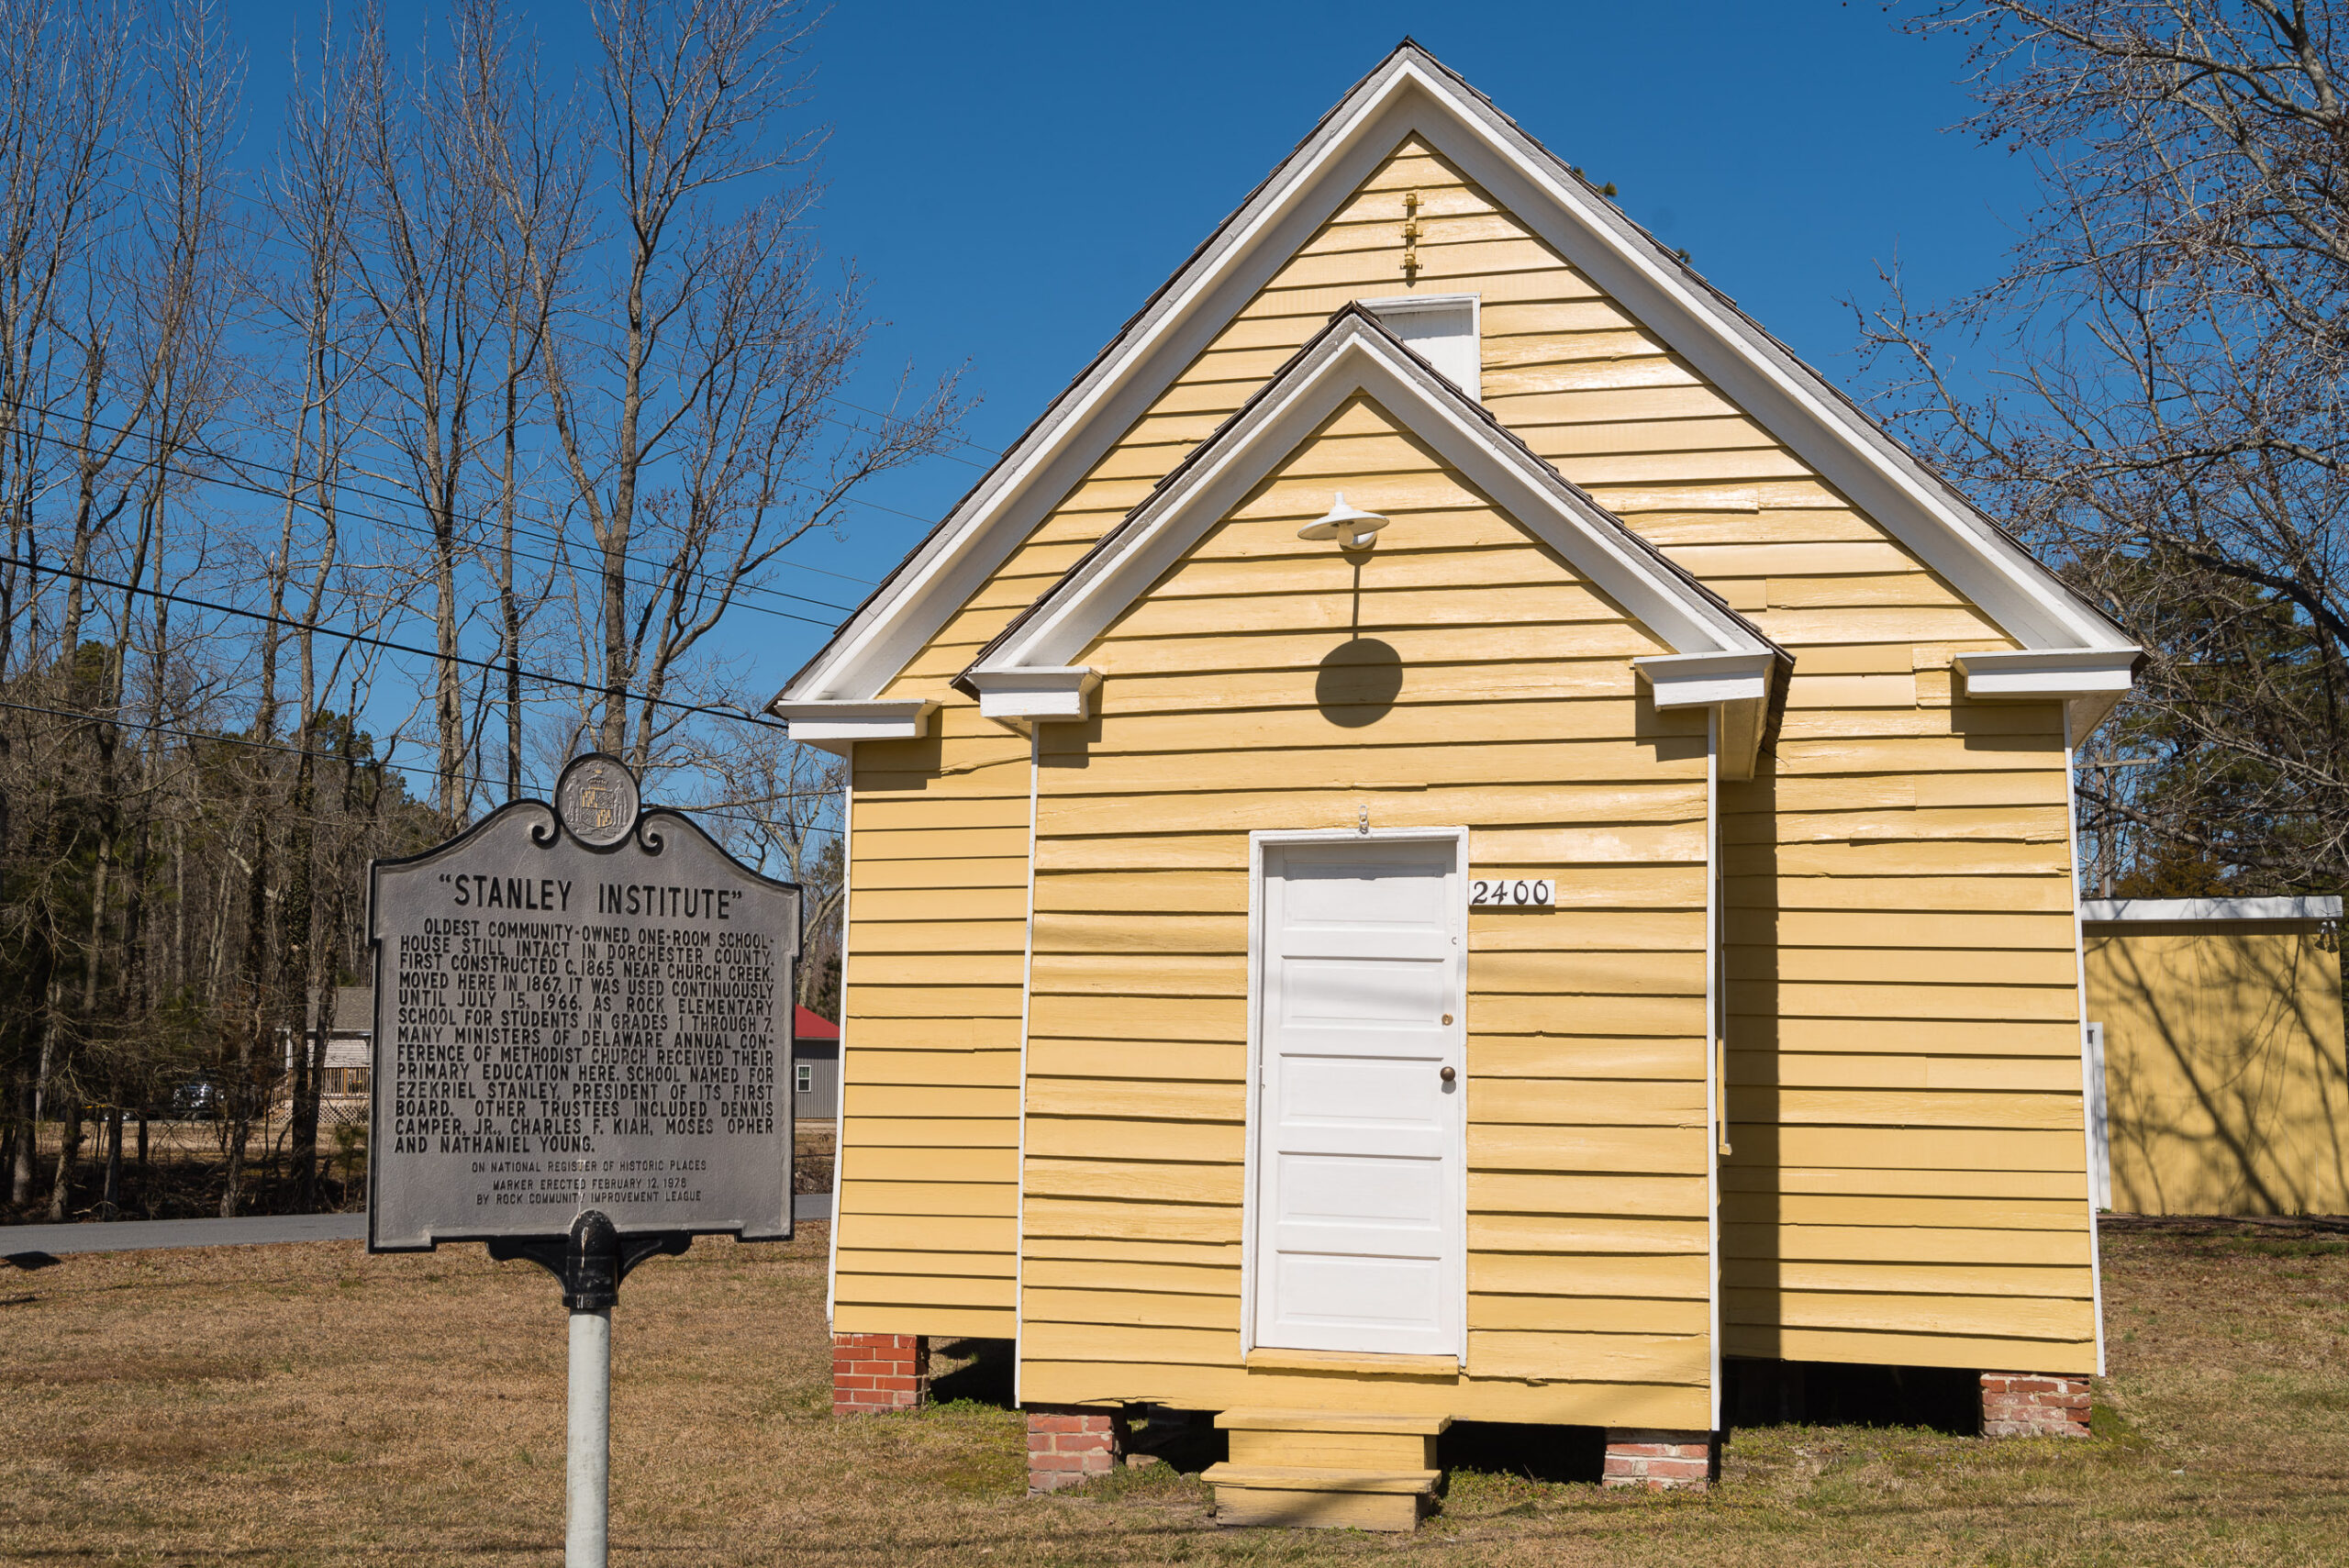 Historical Marker - Stanley Institute, on the Harriet Tubman Byway: Photo: SG (Steve) Atkinson